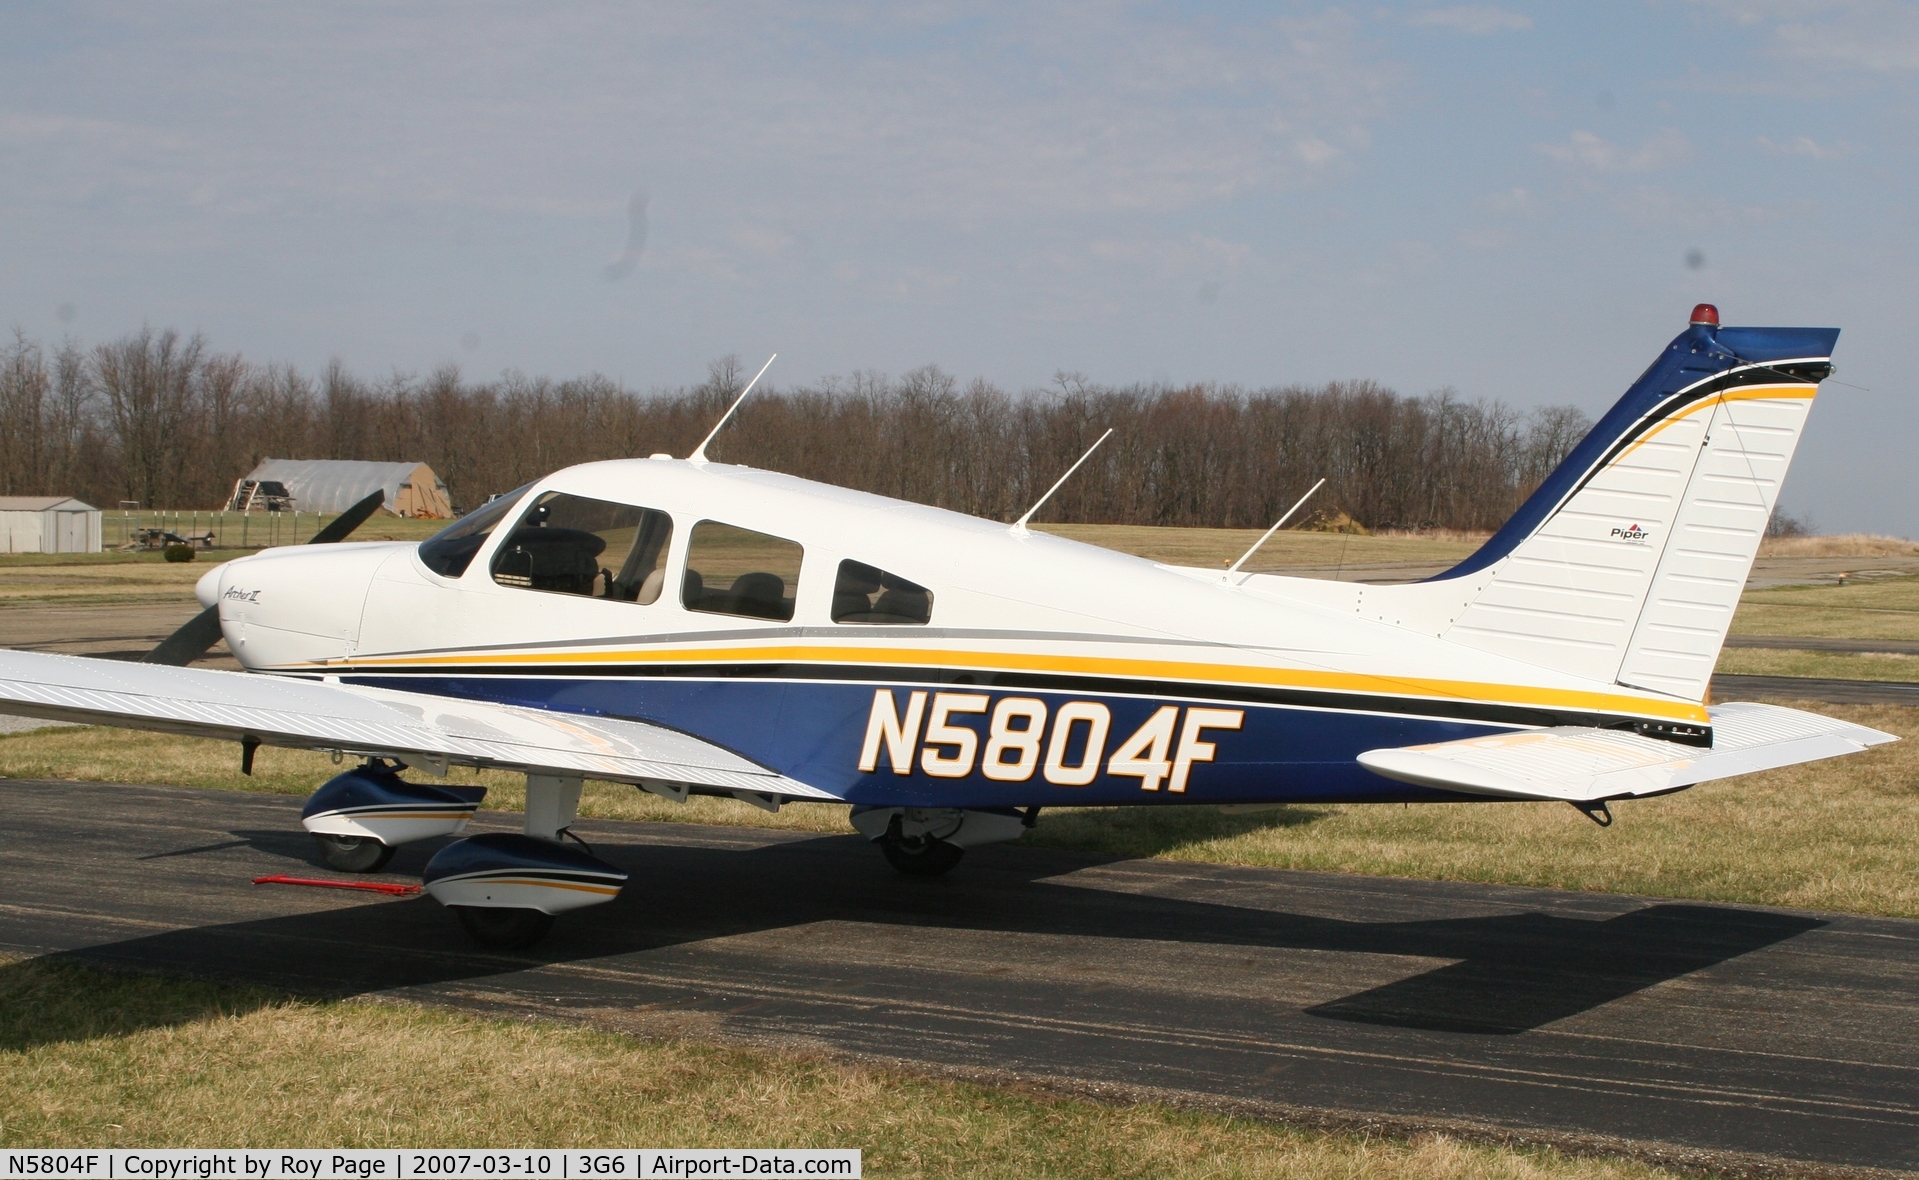 N5804F, 1976 Piper PA-28-181 C/N 28-7790134, N5804F was stripped and painted Feb 2007